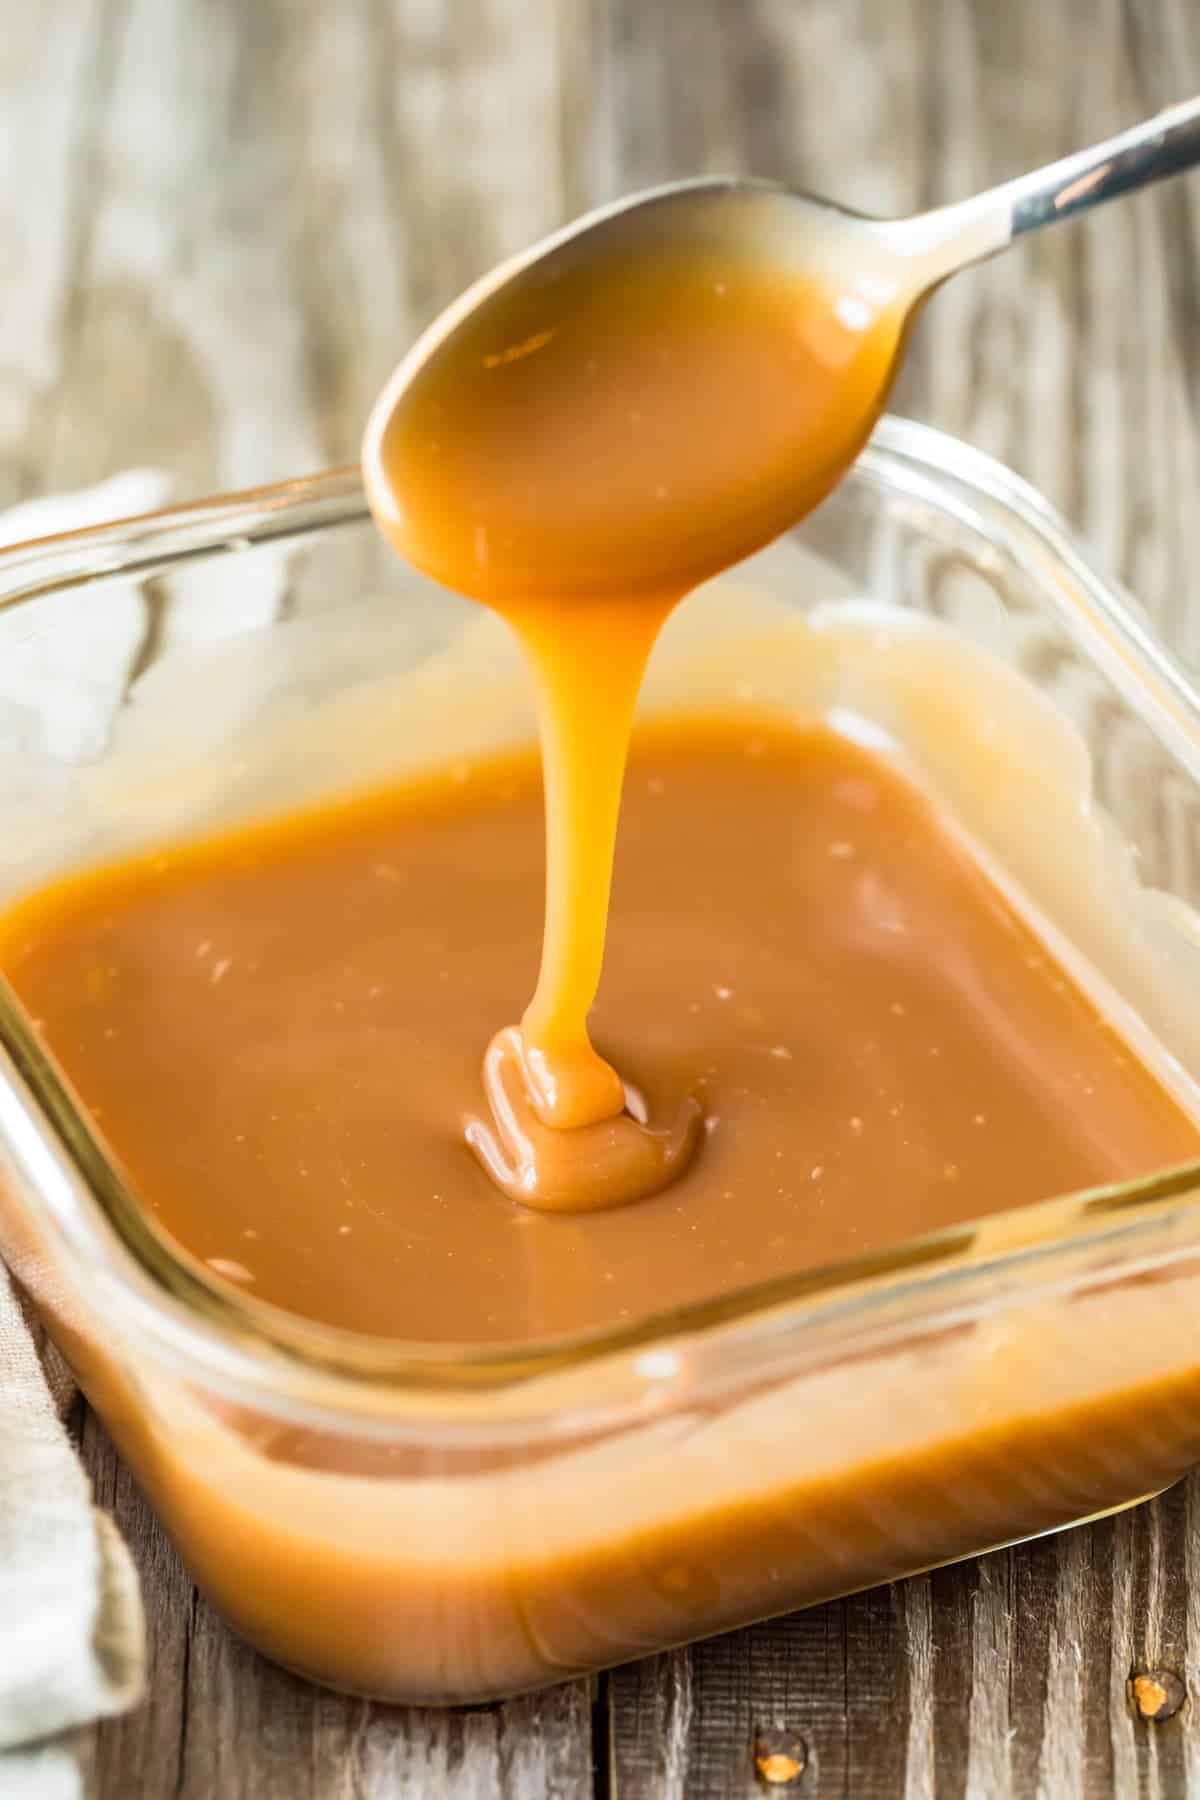 Caramel Sauce dripping from a spoon